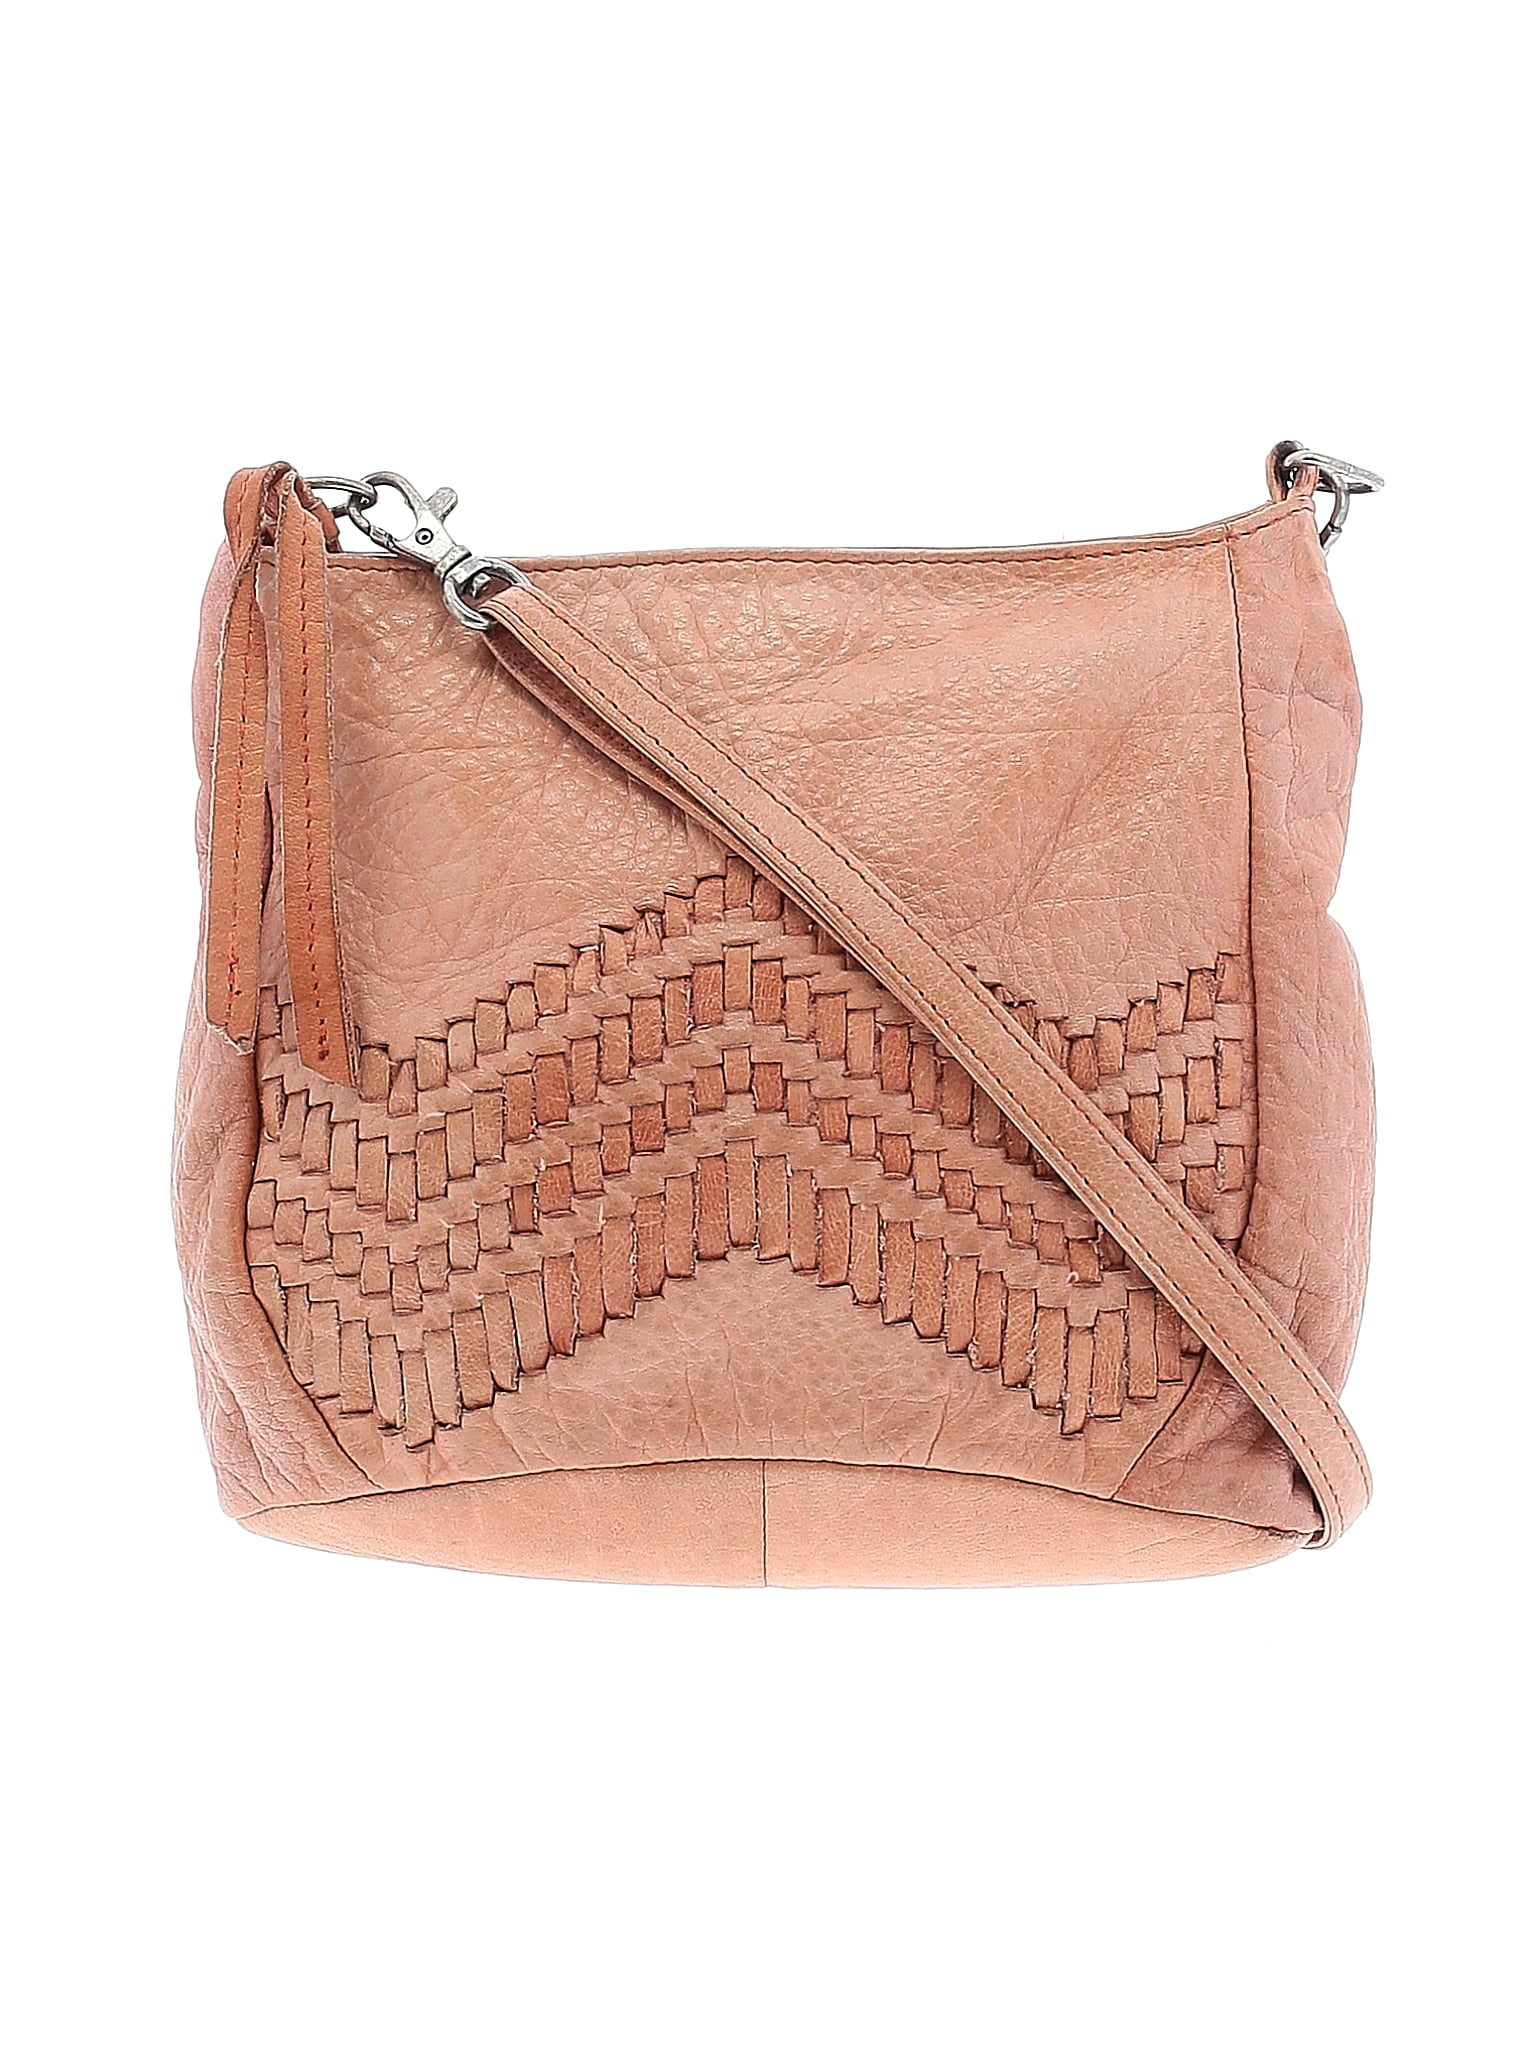 Day & Mood Leather Pink Leather Crossbody Bag One - 74% | thredUP